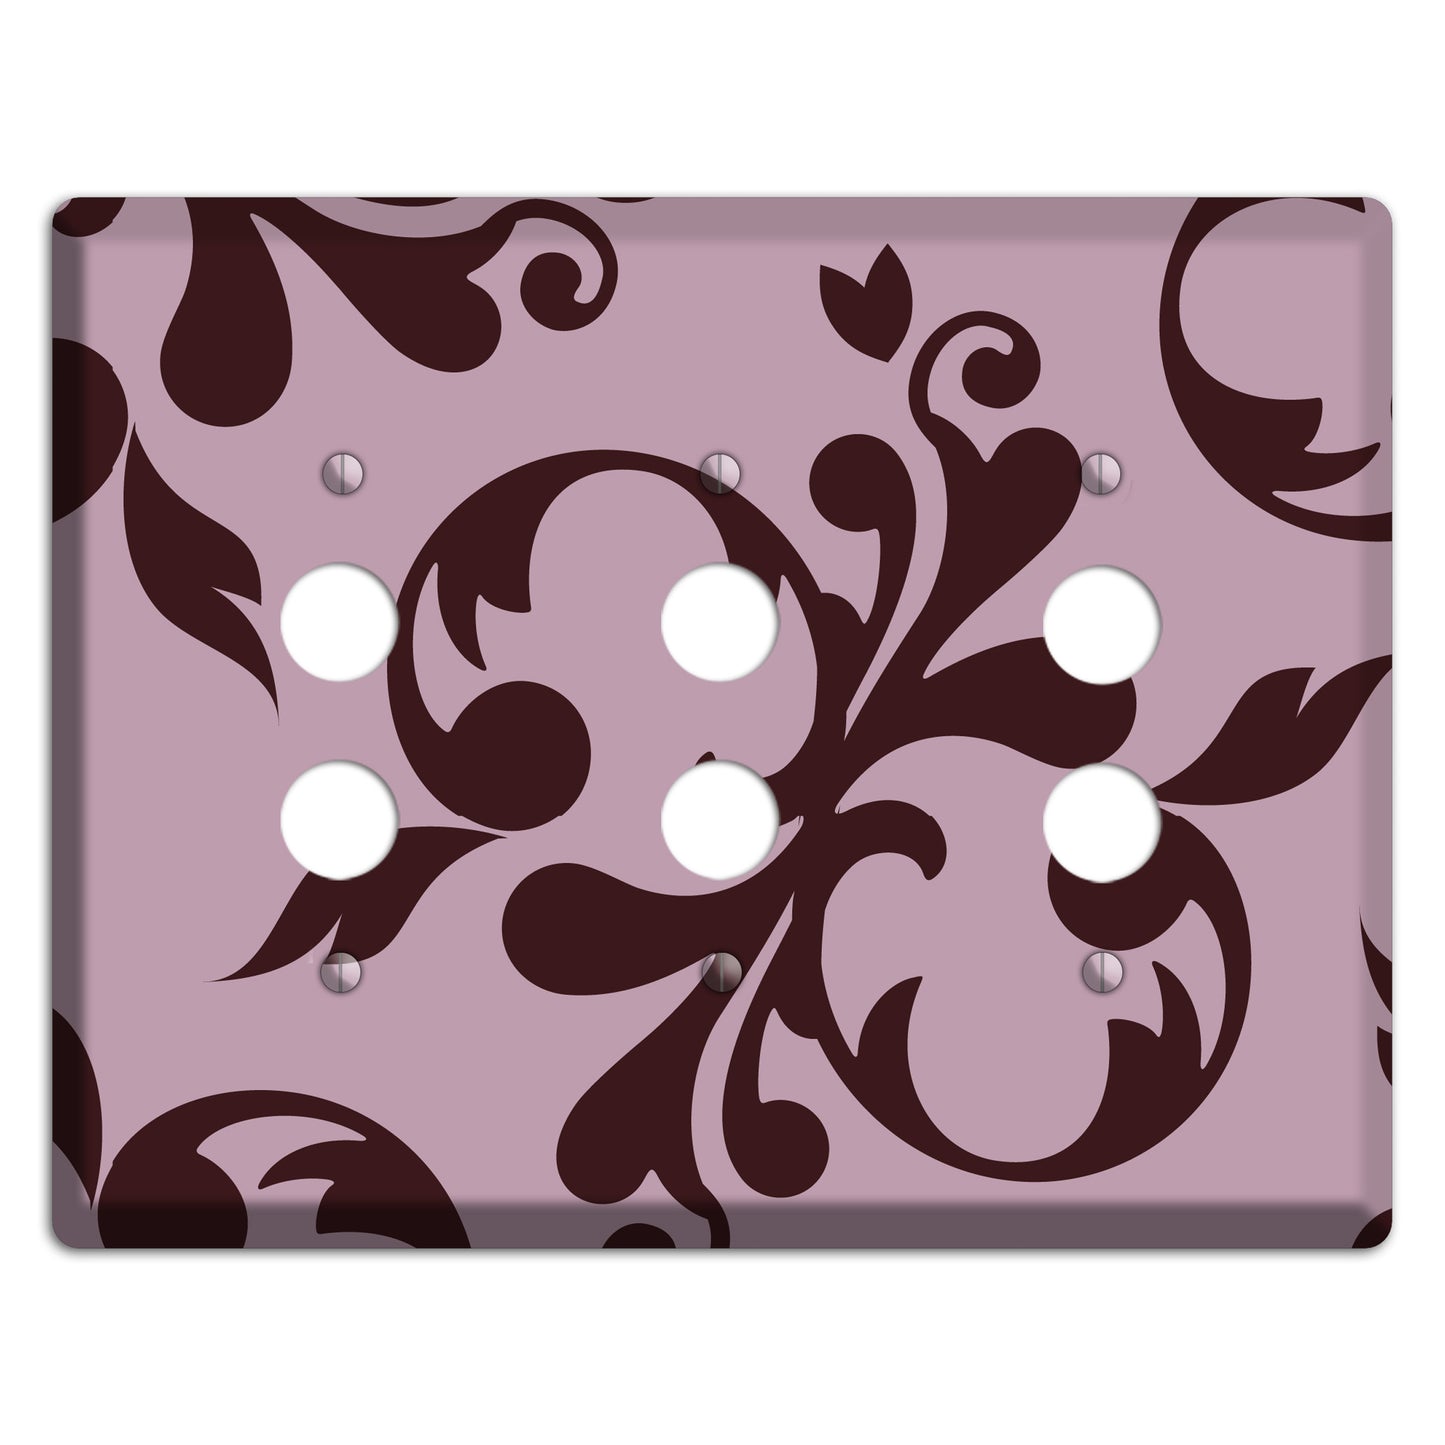 Dusty Rose and Burgundy Toile 3 Pushbutton Wallplate